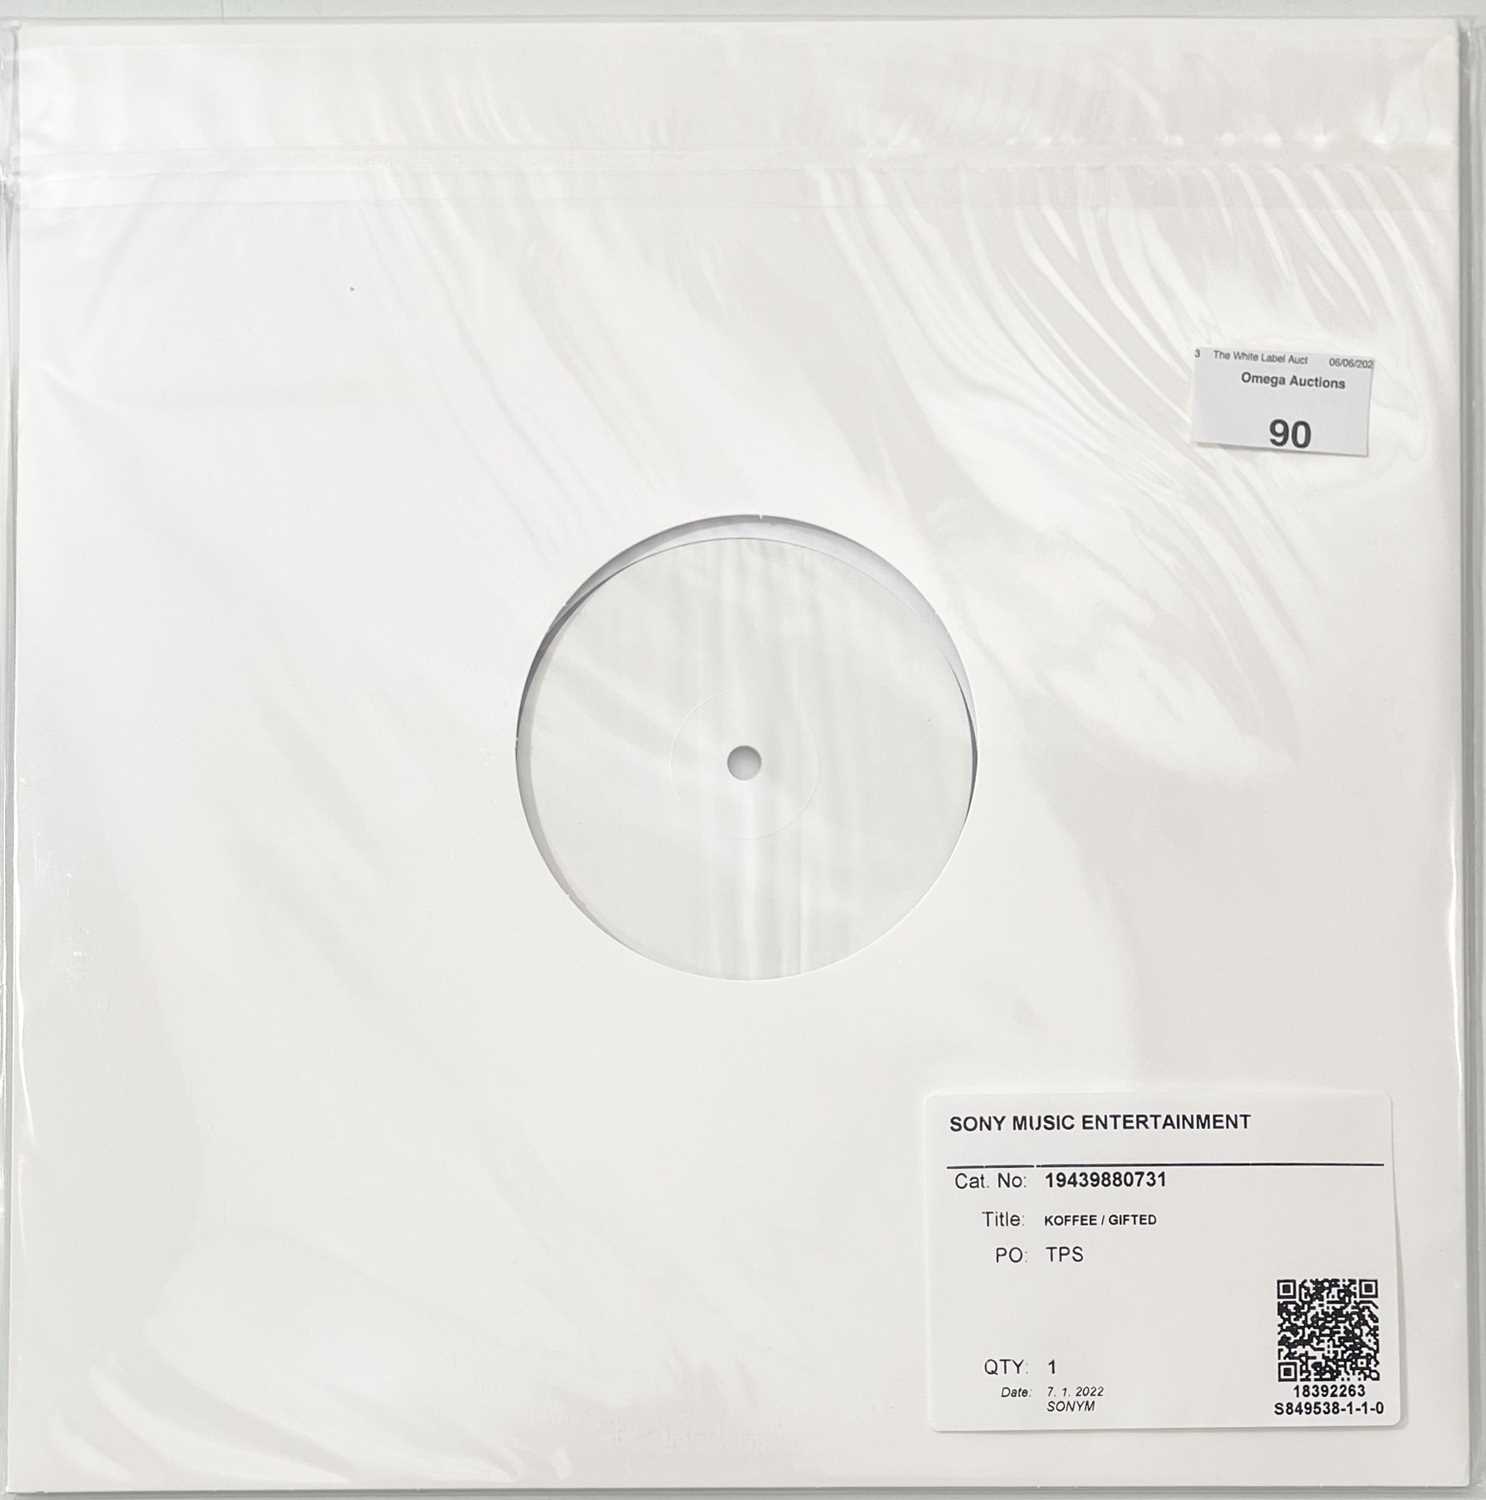 Lot 90 - KOFFEE - GIFTED (2022) WHITE LABEL TEST PRESSING.